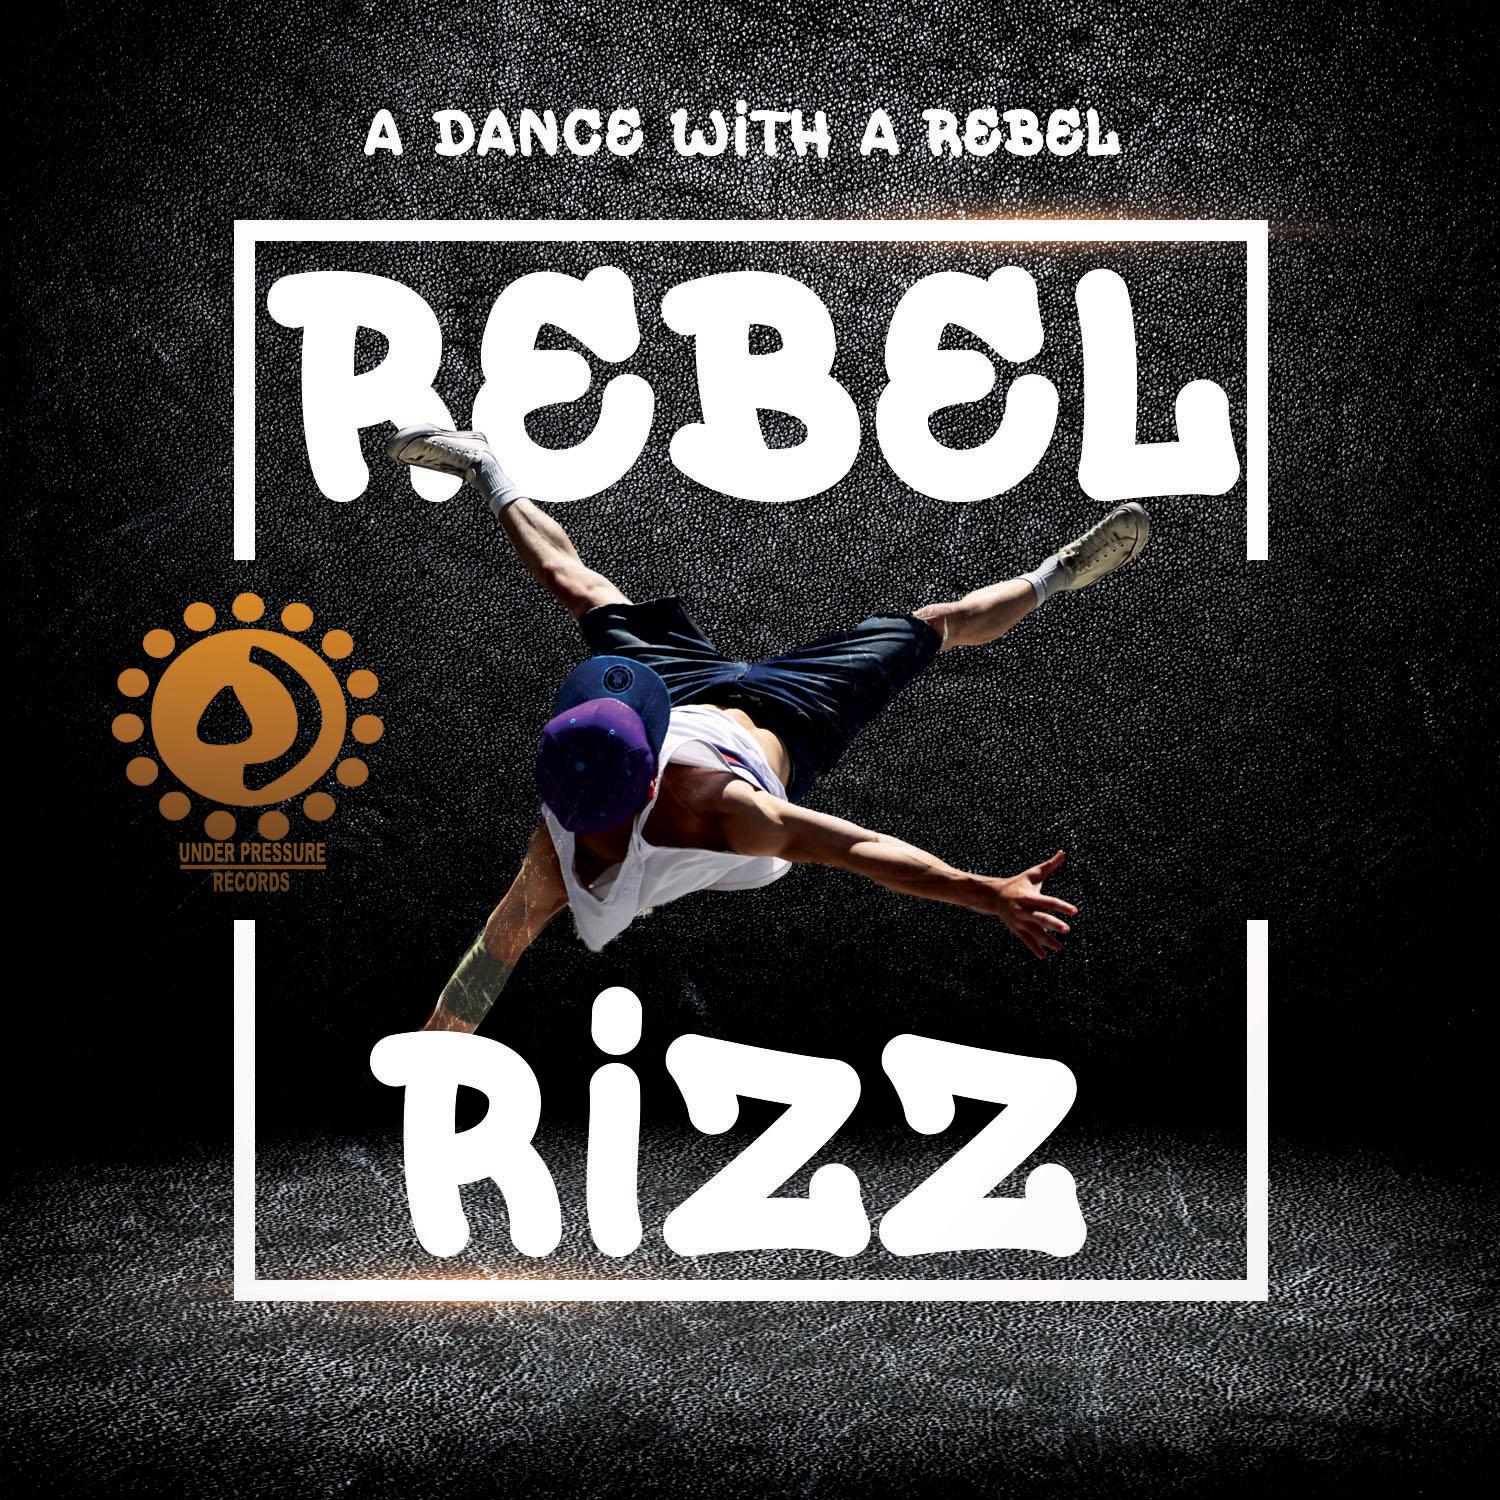 A Dance with a Rebel